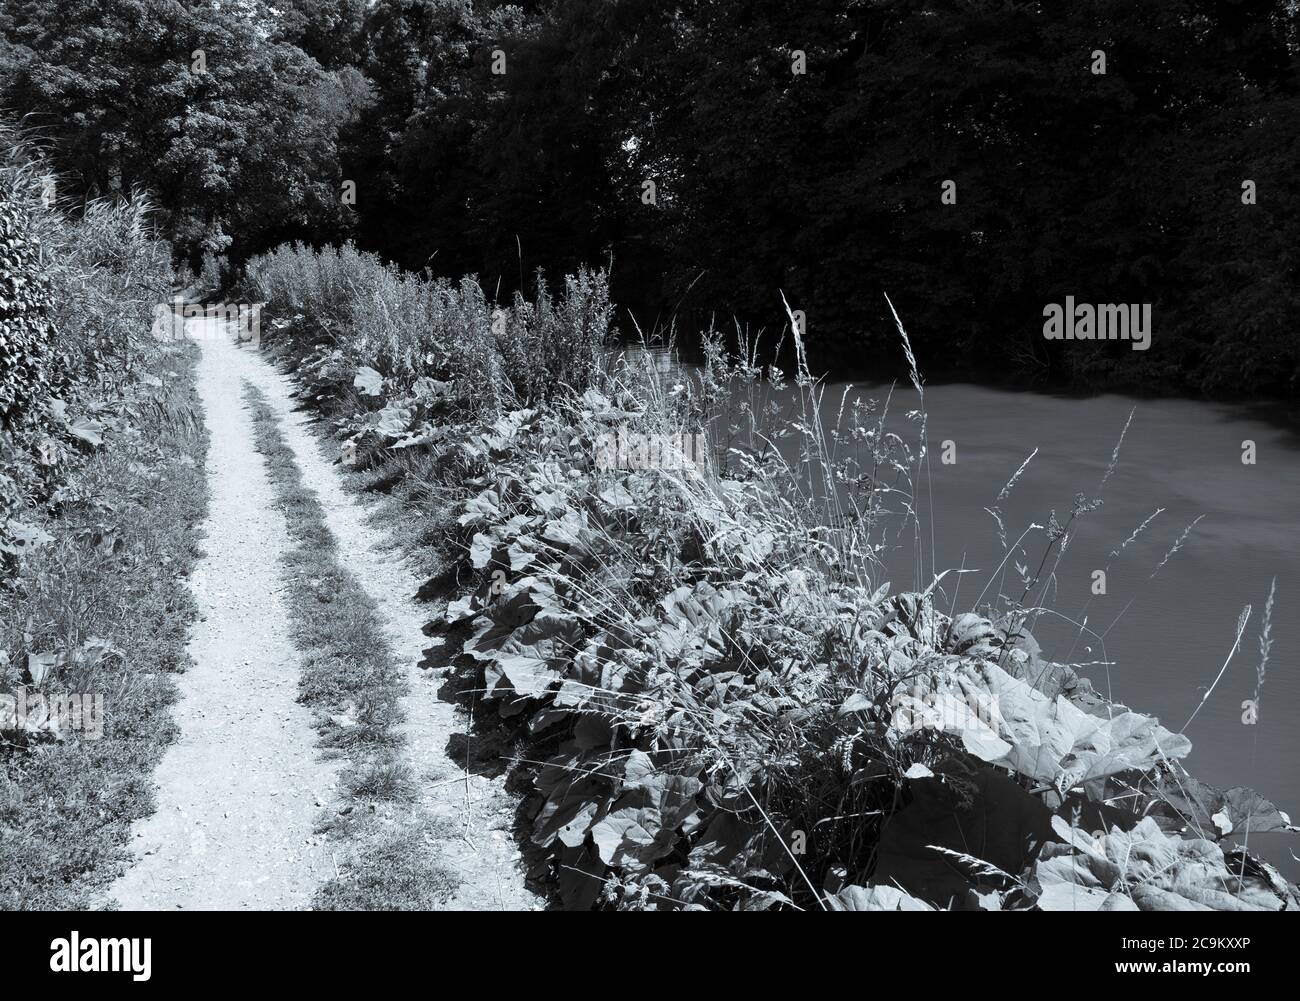 Black and White Landscape of Footpath, Kennett and Avon Canal, Kintbury, Hungerford, Berkshire, Angleterre, Royaume-Uni, GB. Banque D'Images